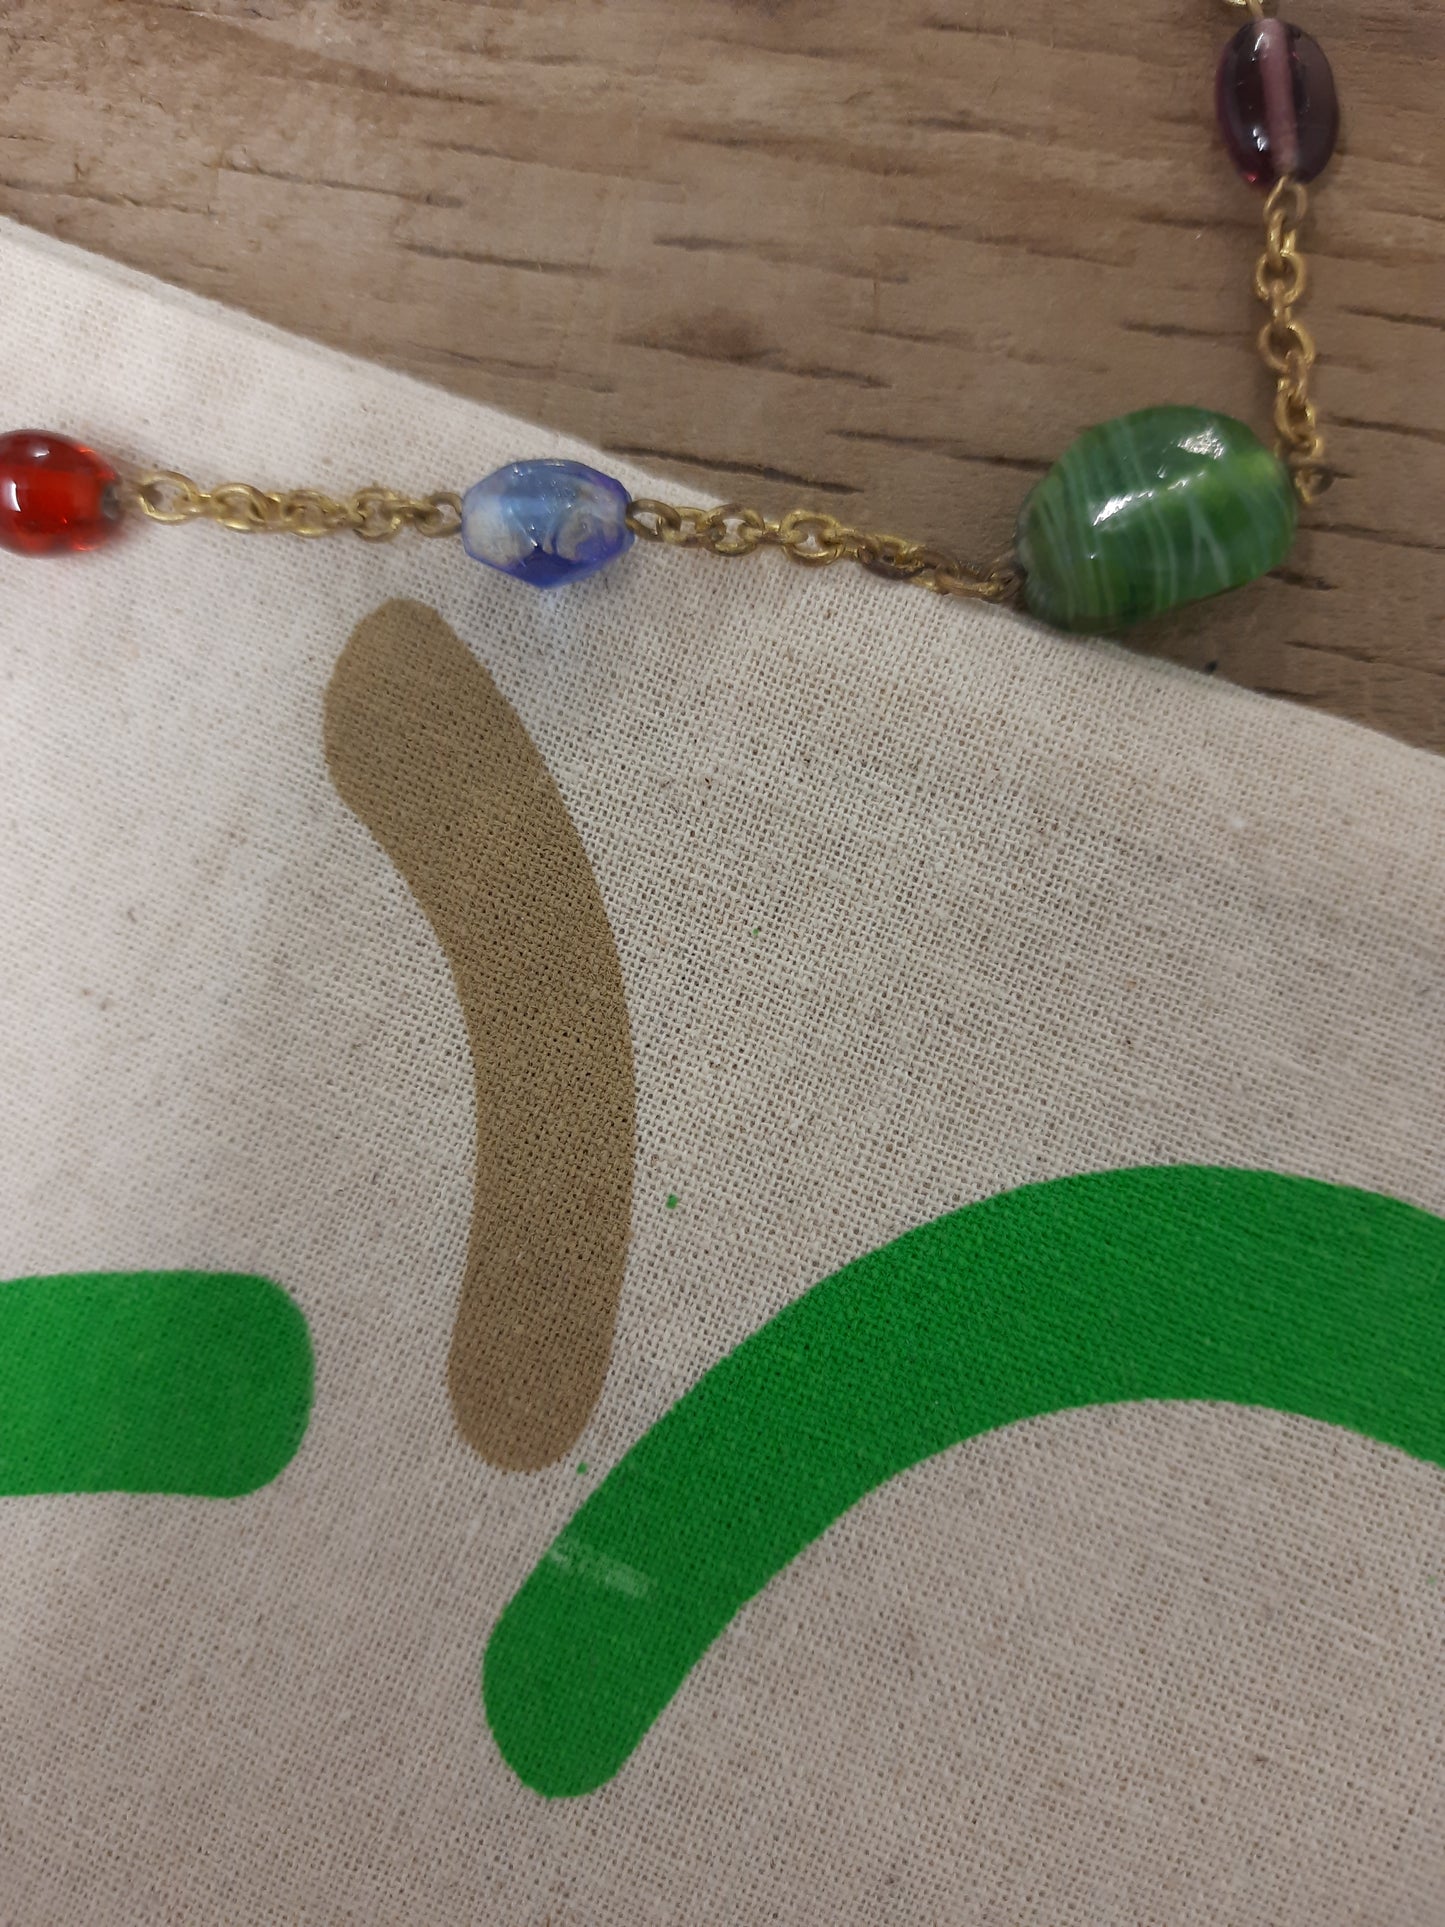 Fair Trade Jewellery  Gifts, Necklace, Jewellery Stores Near Me, Eco Friendly Things, BIG GREEN APPLE